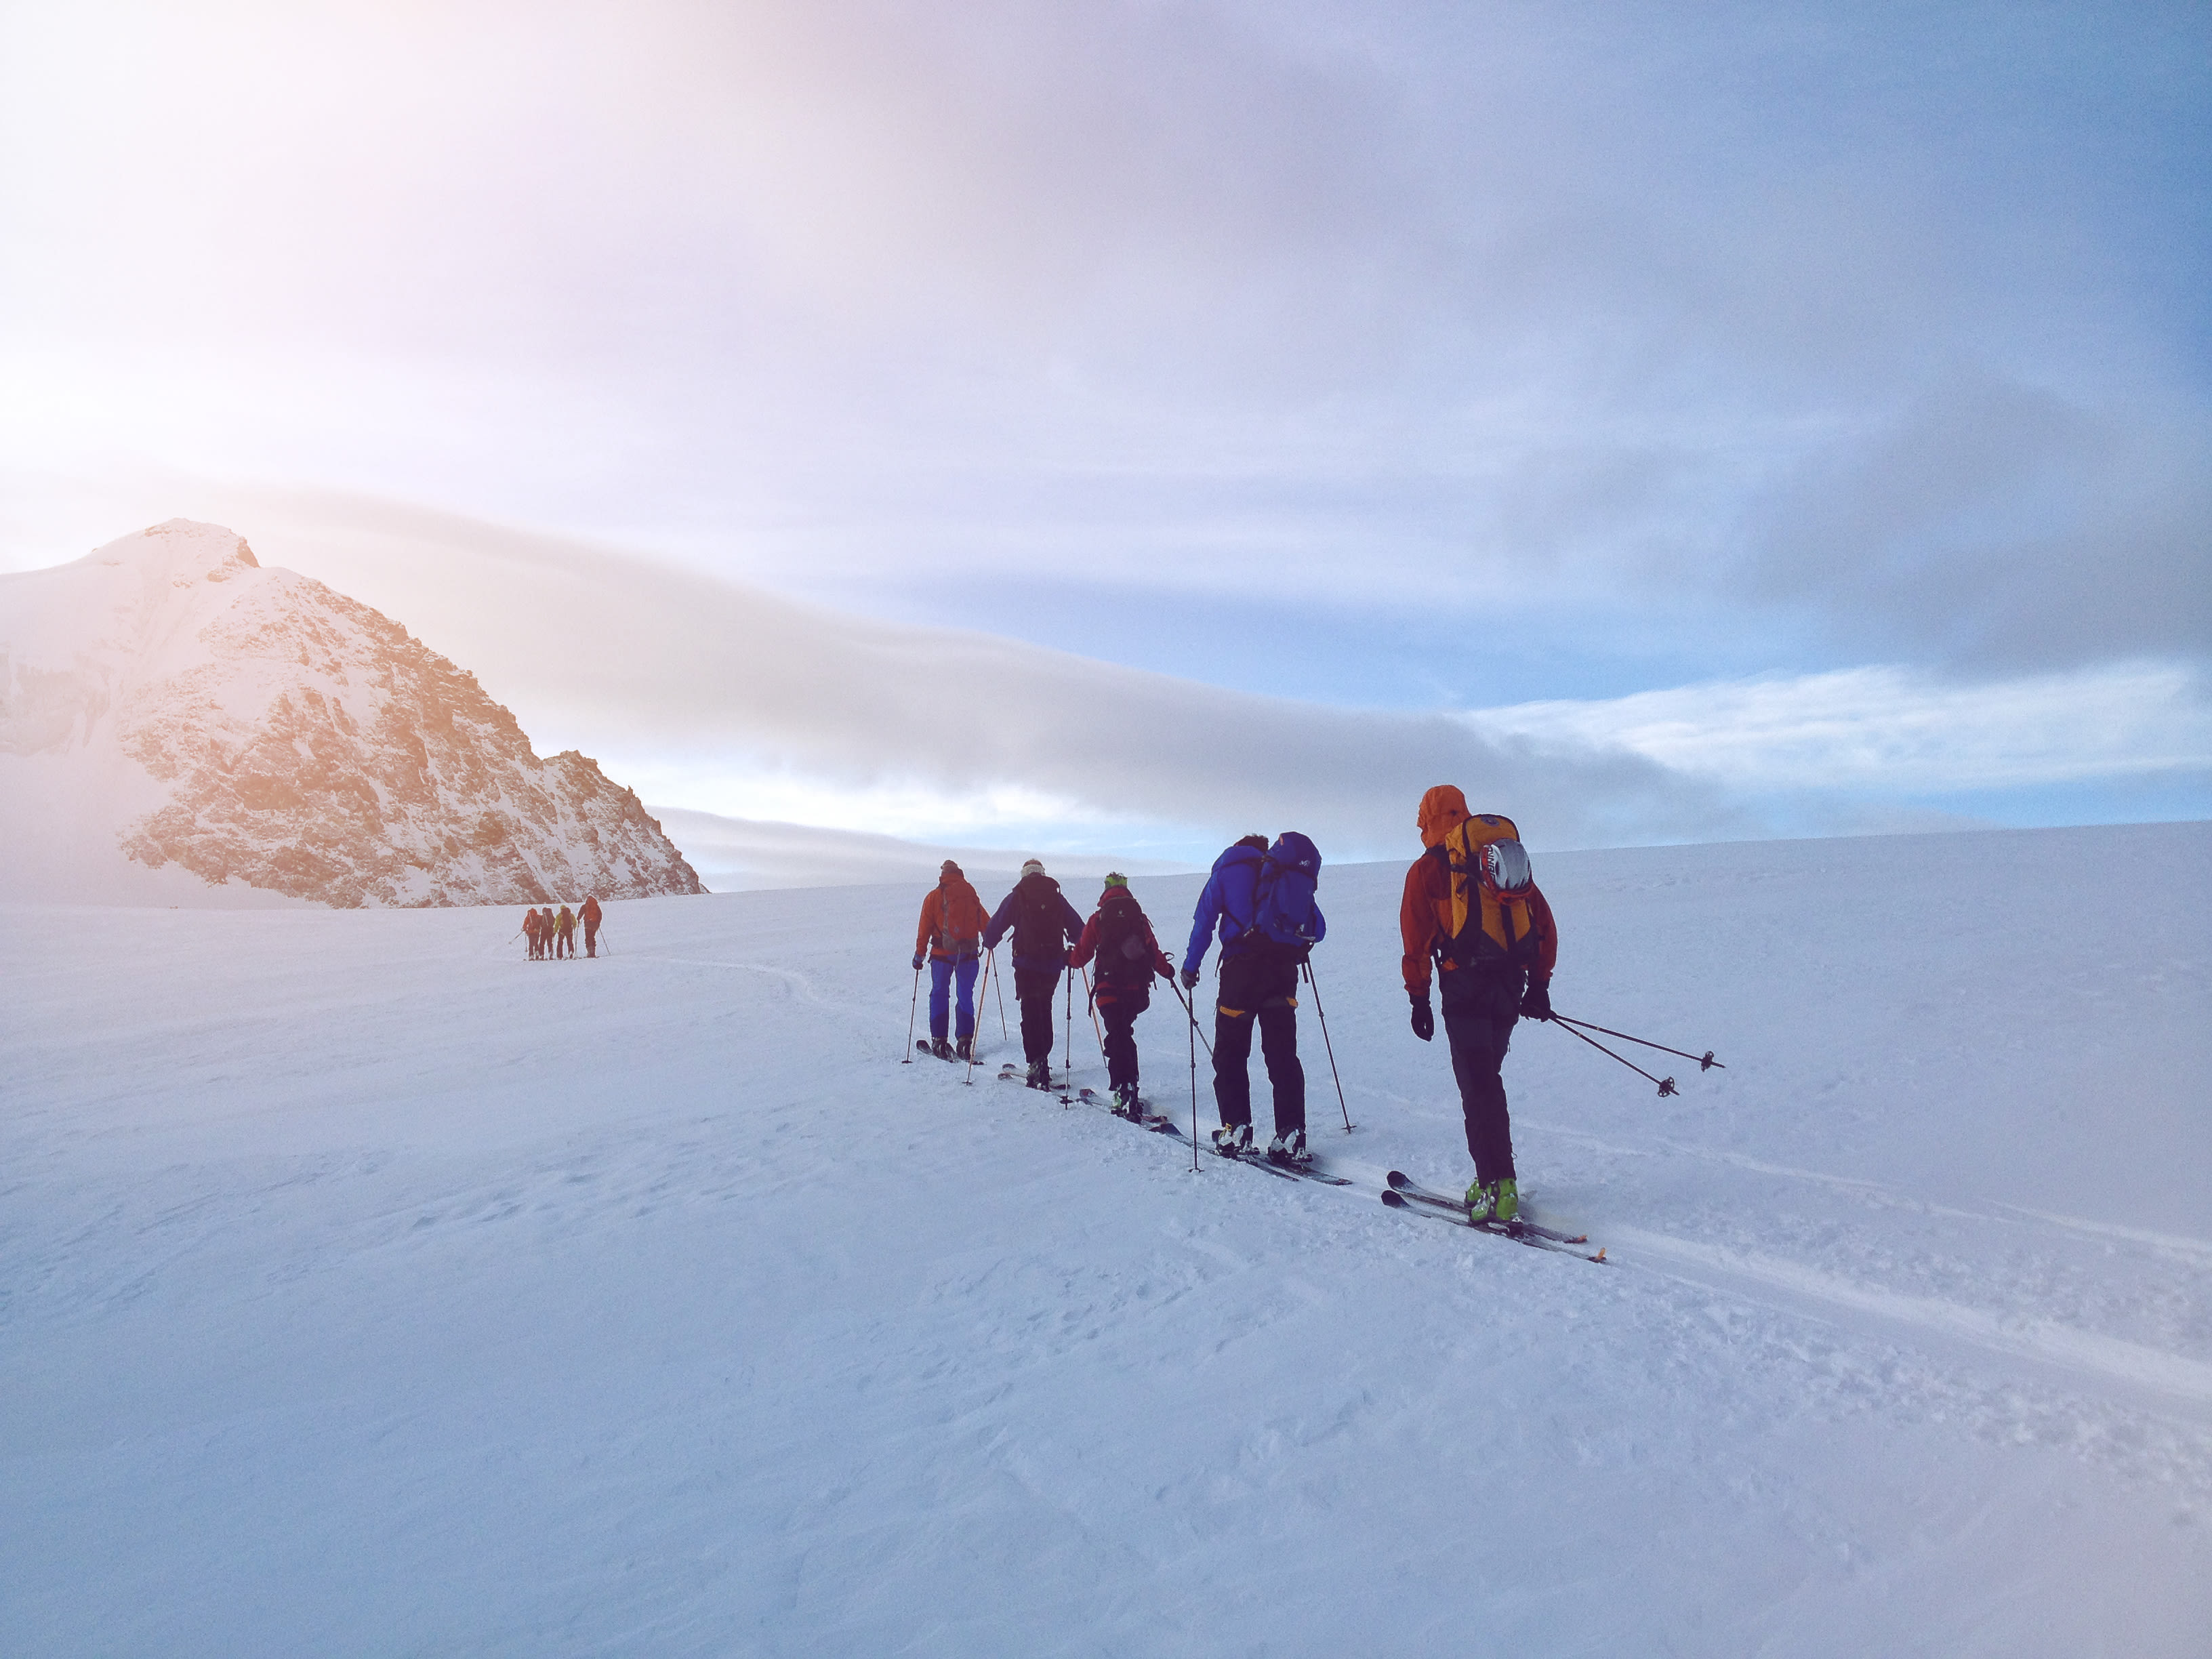 With ski or snowshoes - Edward Bekker guides his guests through the winter magic.